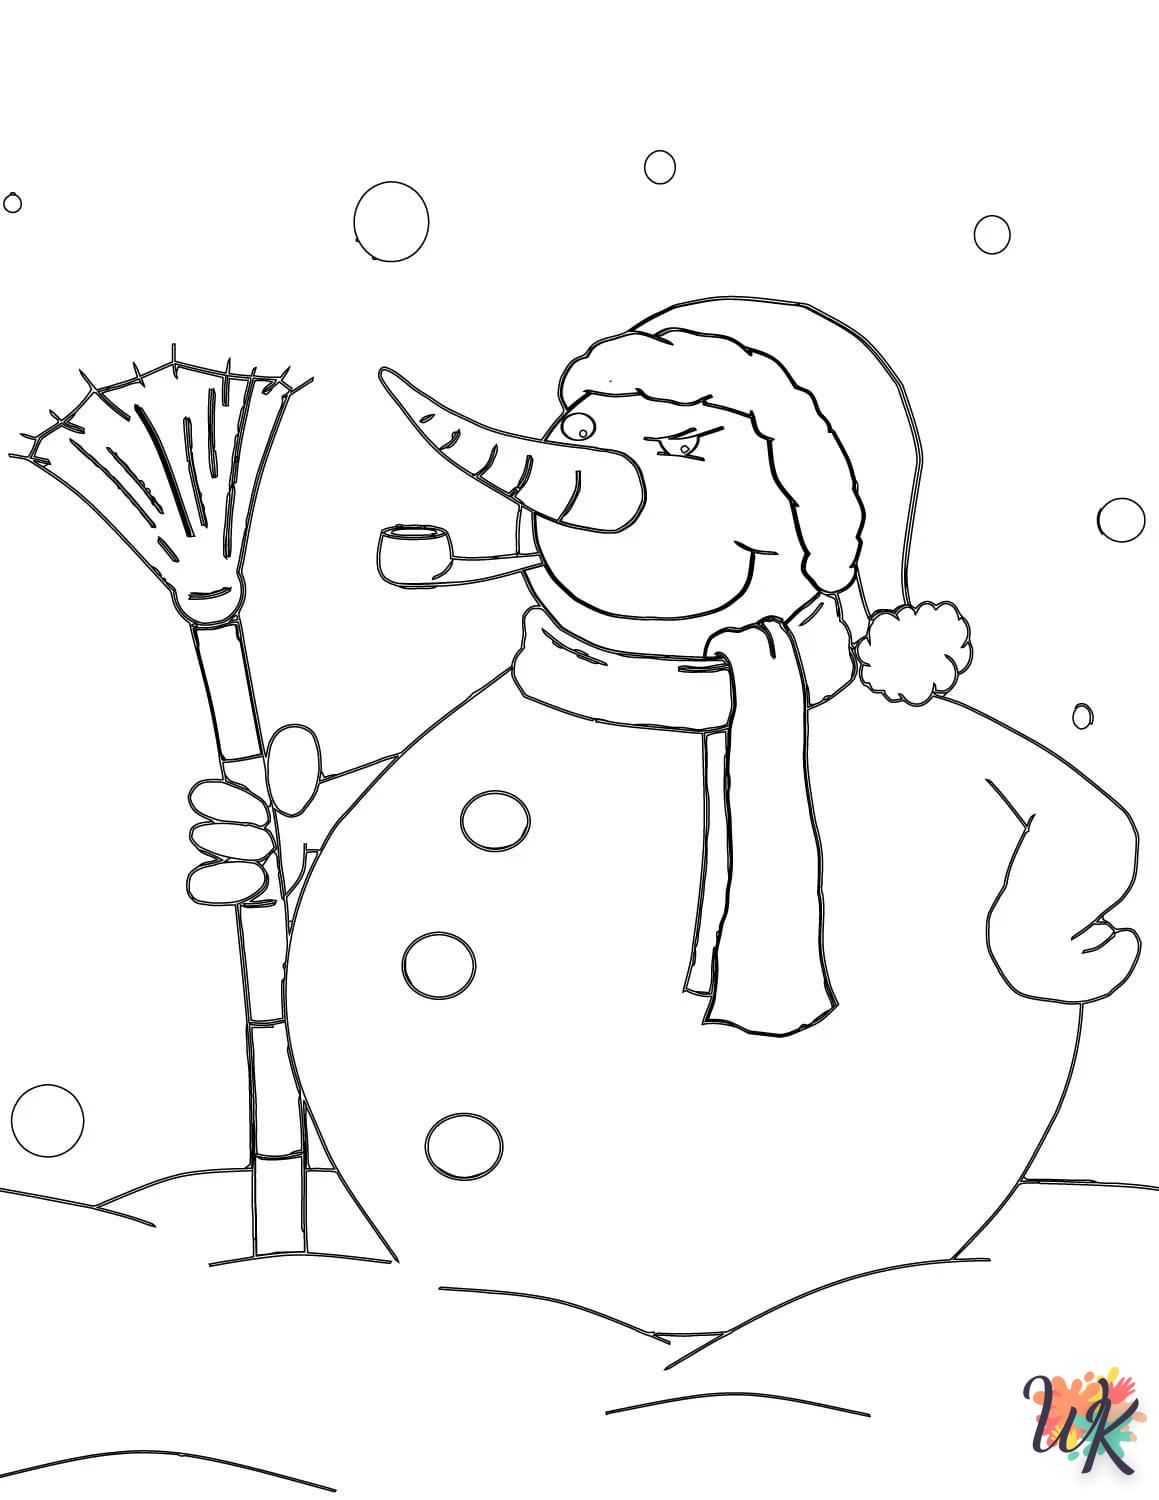 Snowman coloring page to print for 12 year olds